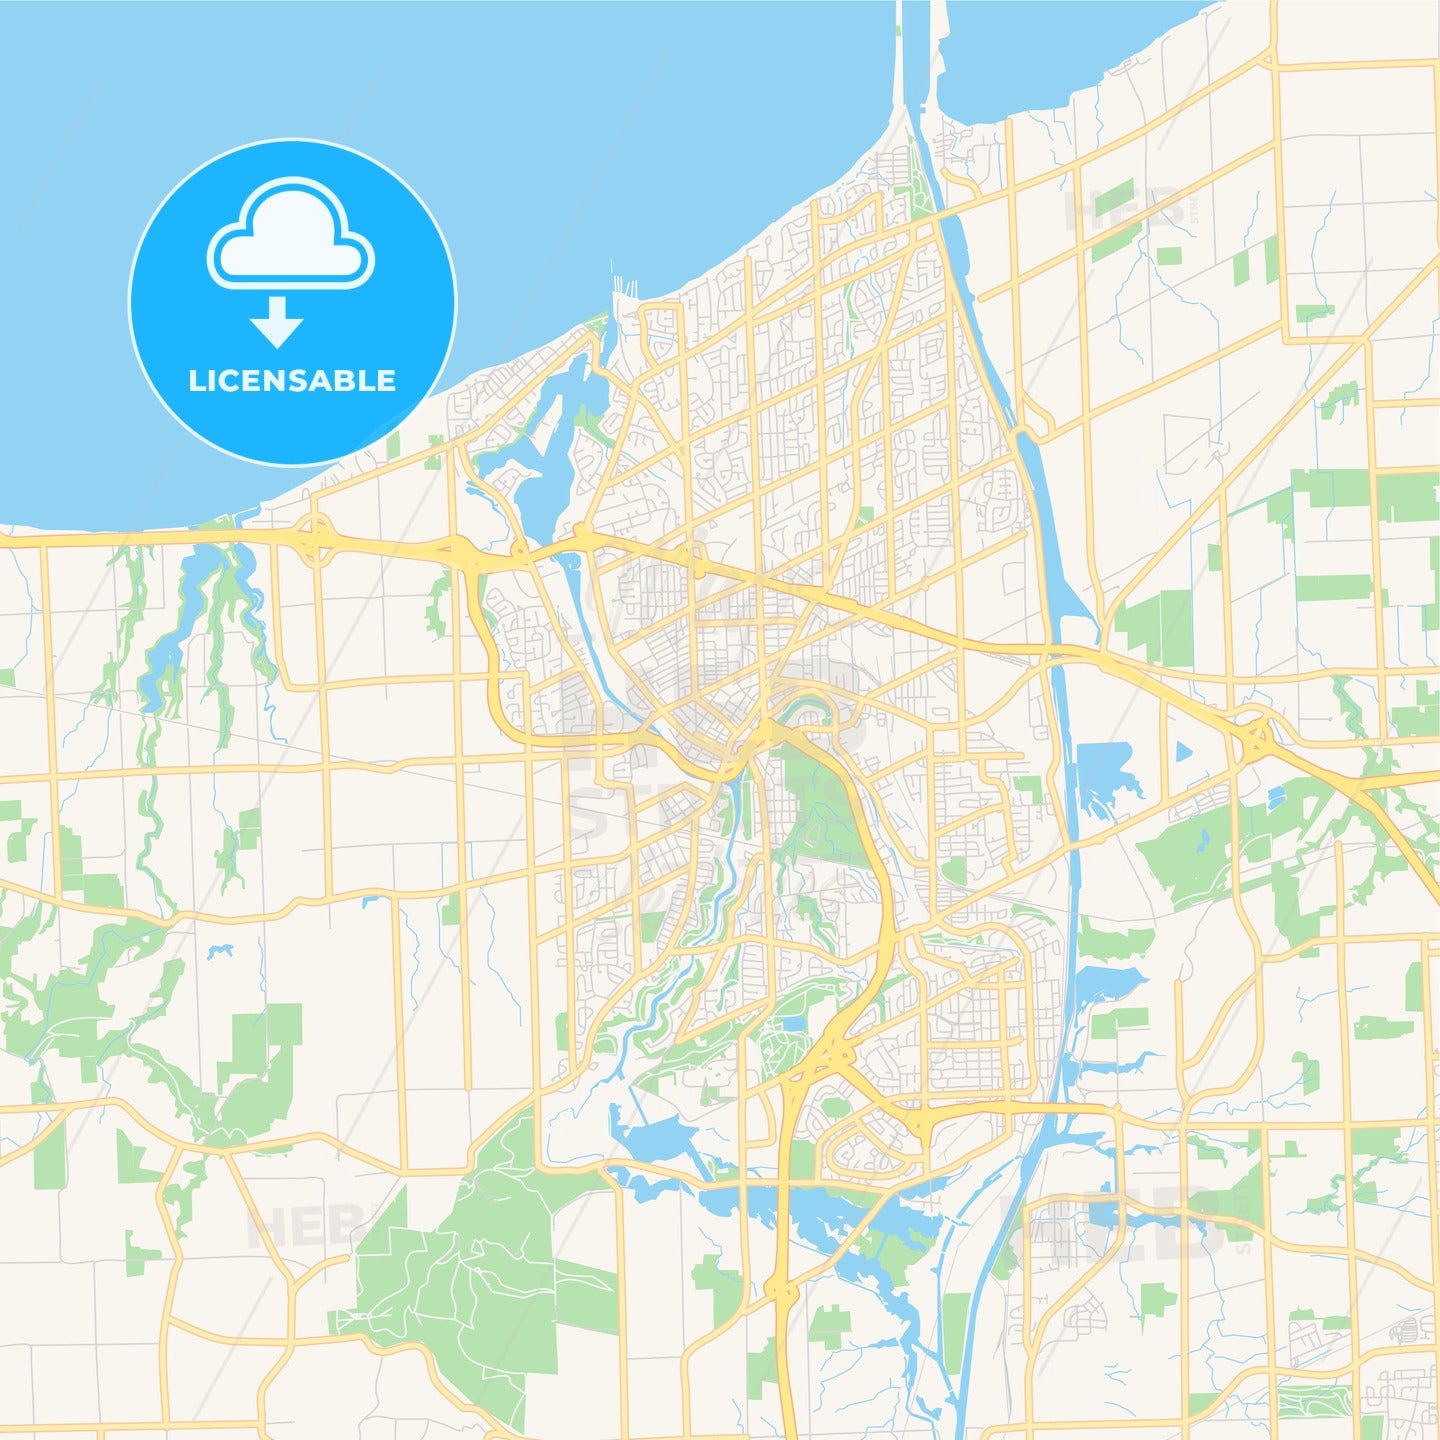 Empty vector map of St. Catharines, Ontario, Canada